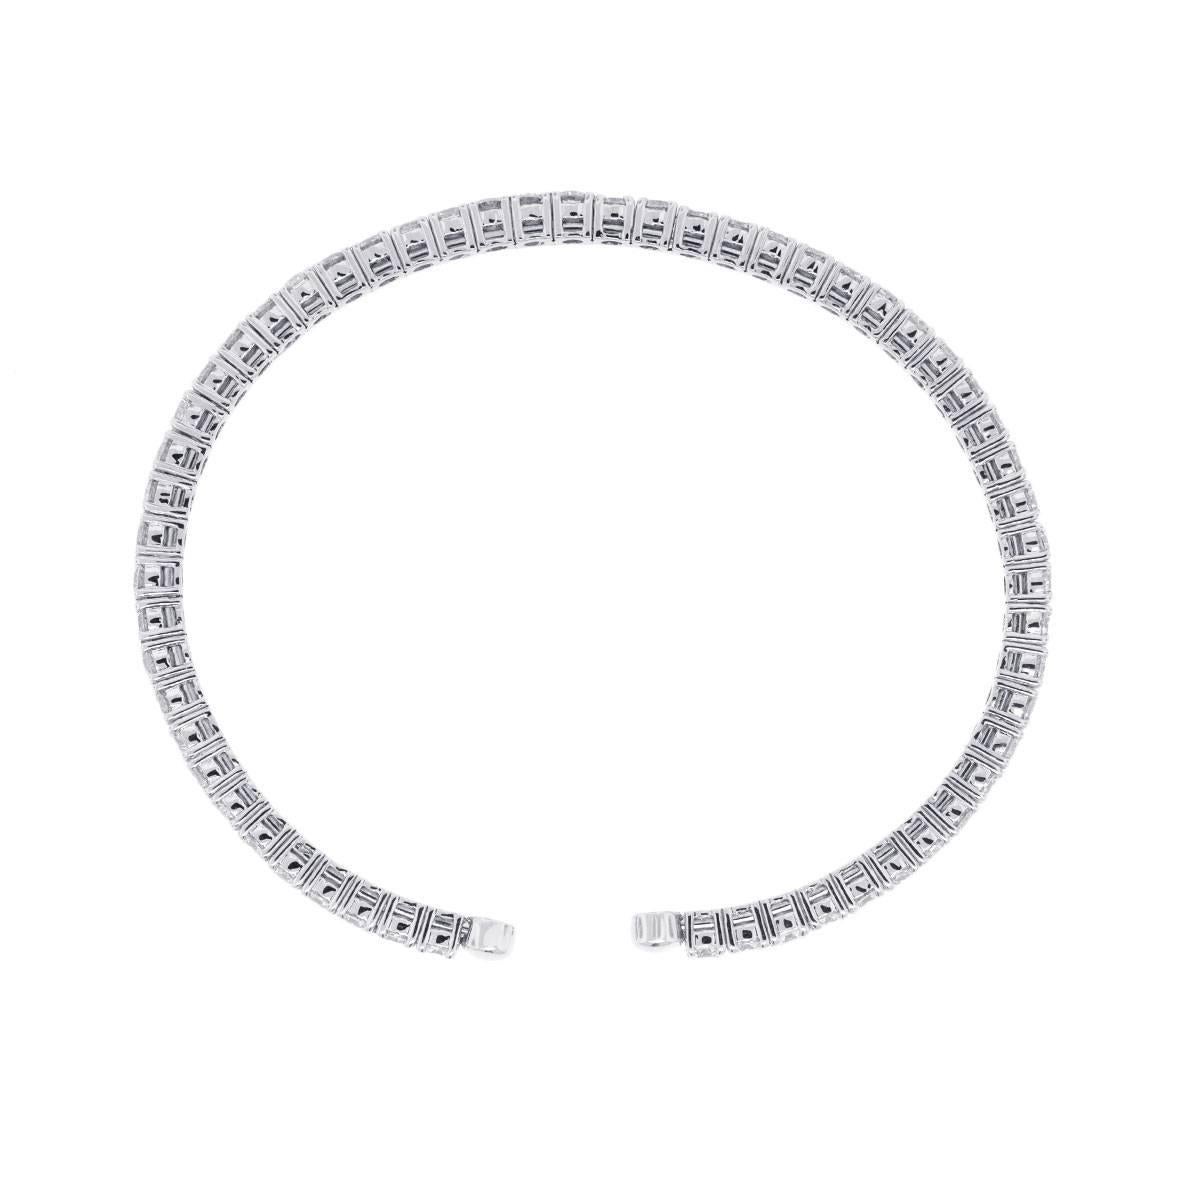 Material: 14k white gold
Diamond Details: Approximately 5.22ctw of round brilliant diamonds. Diamonds are G/H in color and VS in clarity.
Total Weight: 14.0g (9.0dwt)
Measurements: Fits up to a 7